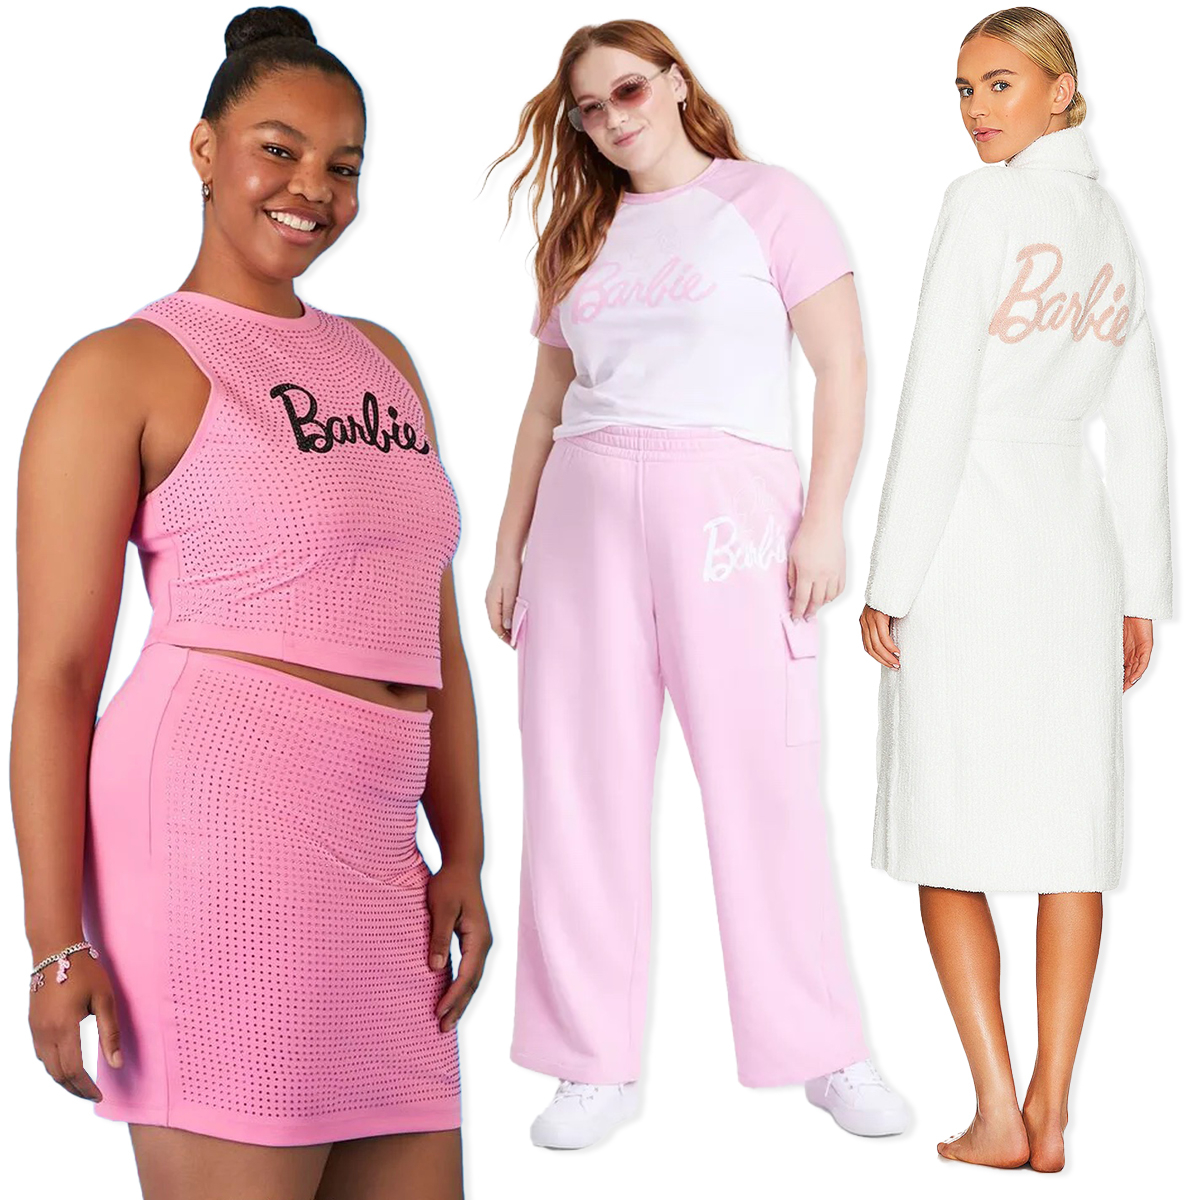 Come on Barbie, Let’s Go Shopping: A Guide to the Best Barbie Collabs